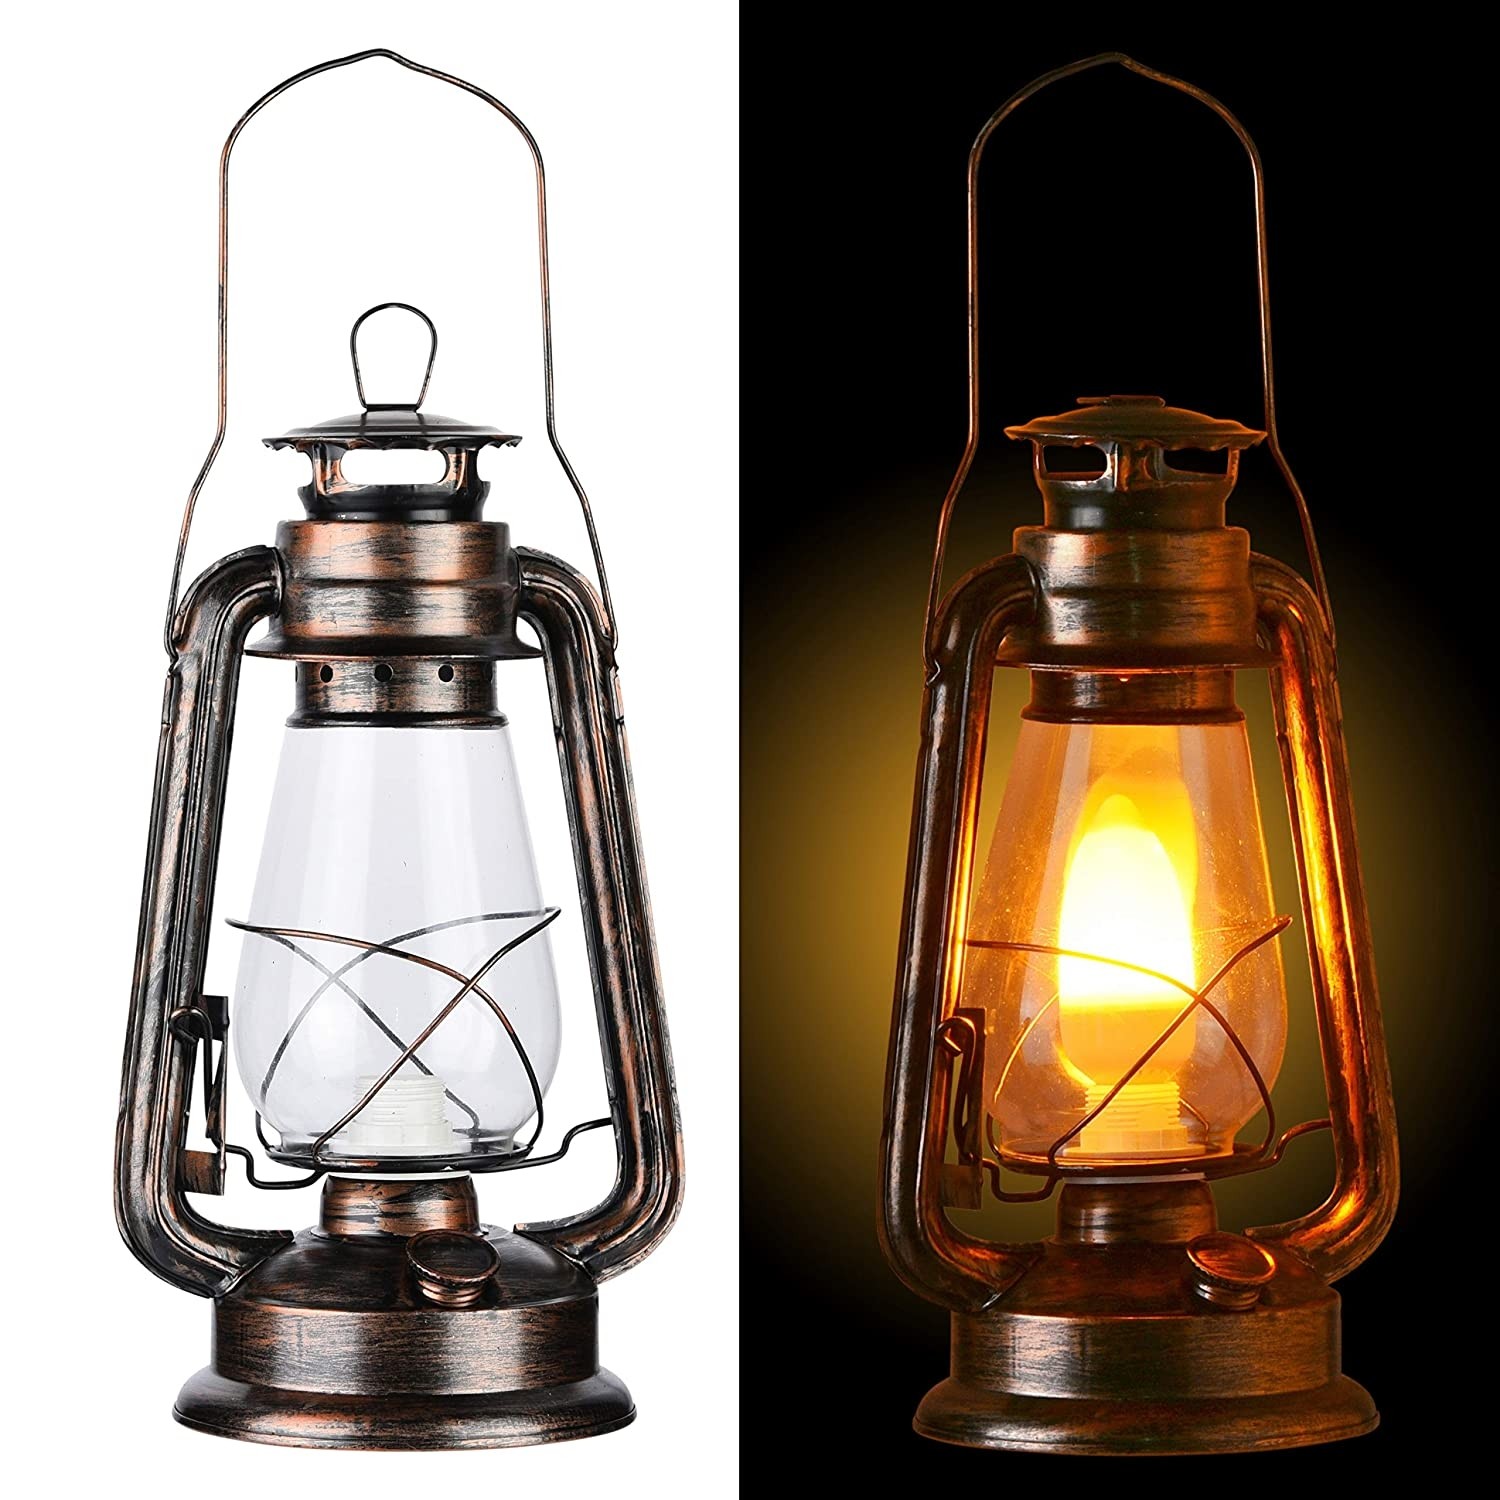 Vintage rustic accent old fashioned electric lantern oil